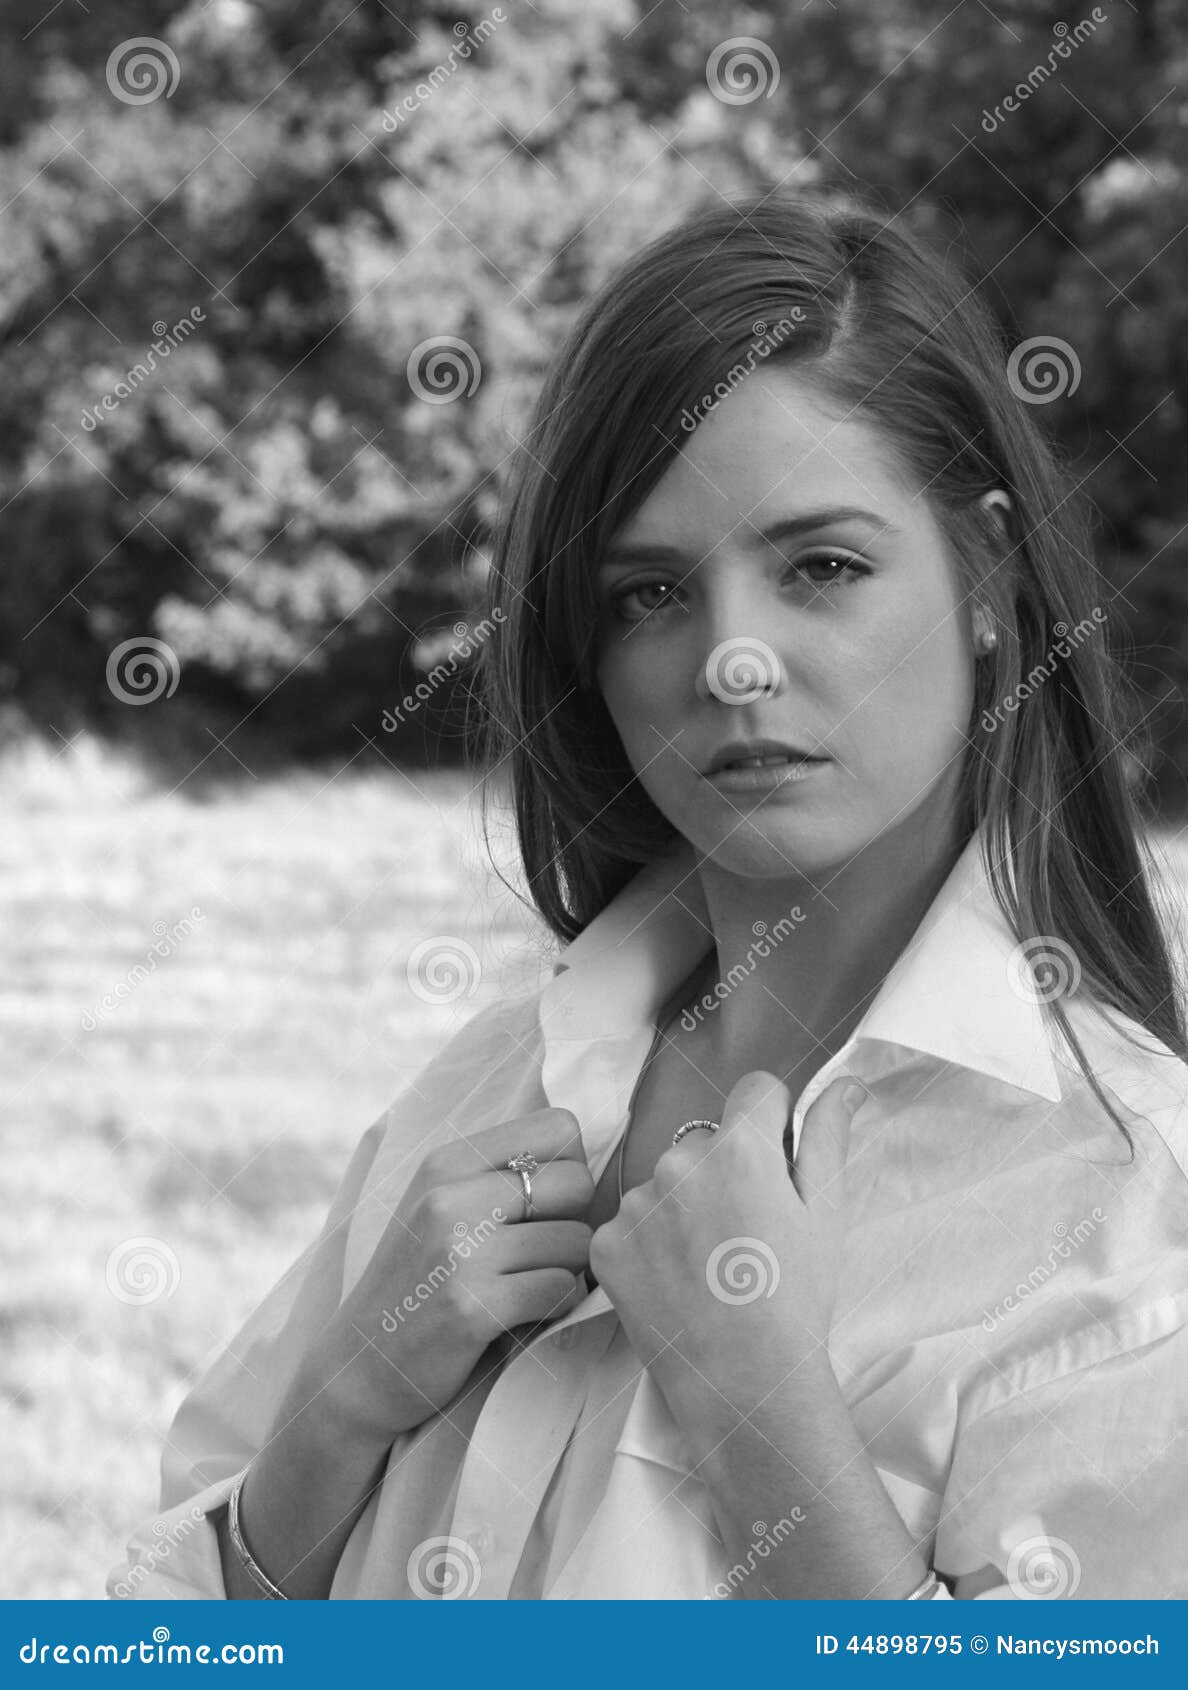 Girl with a Sultry Look - Portrait Stock Image - Image of hair, girl ...